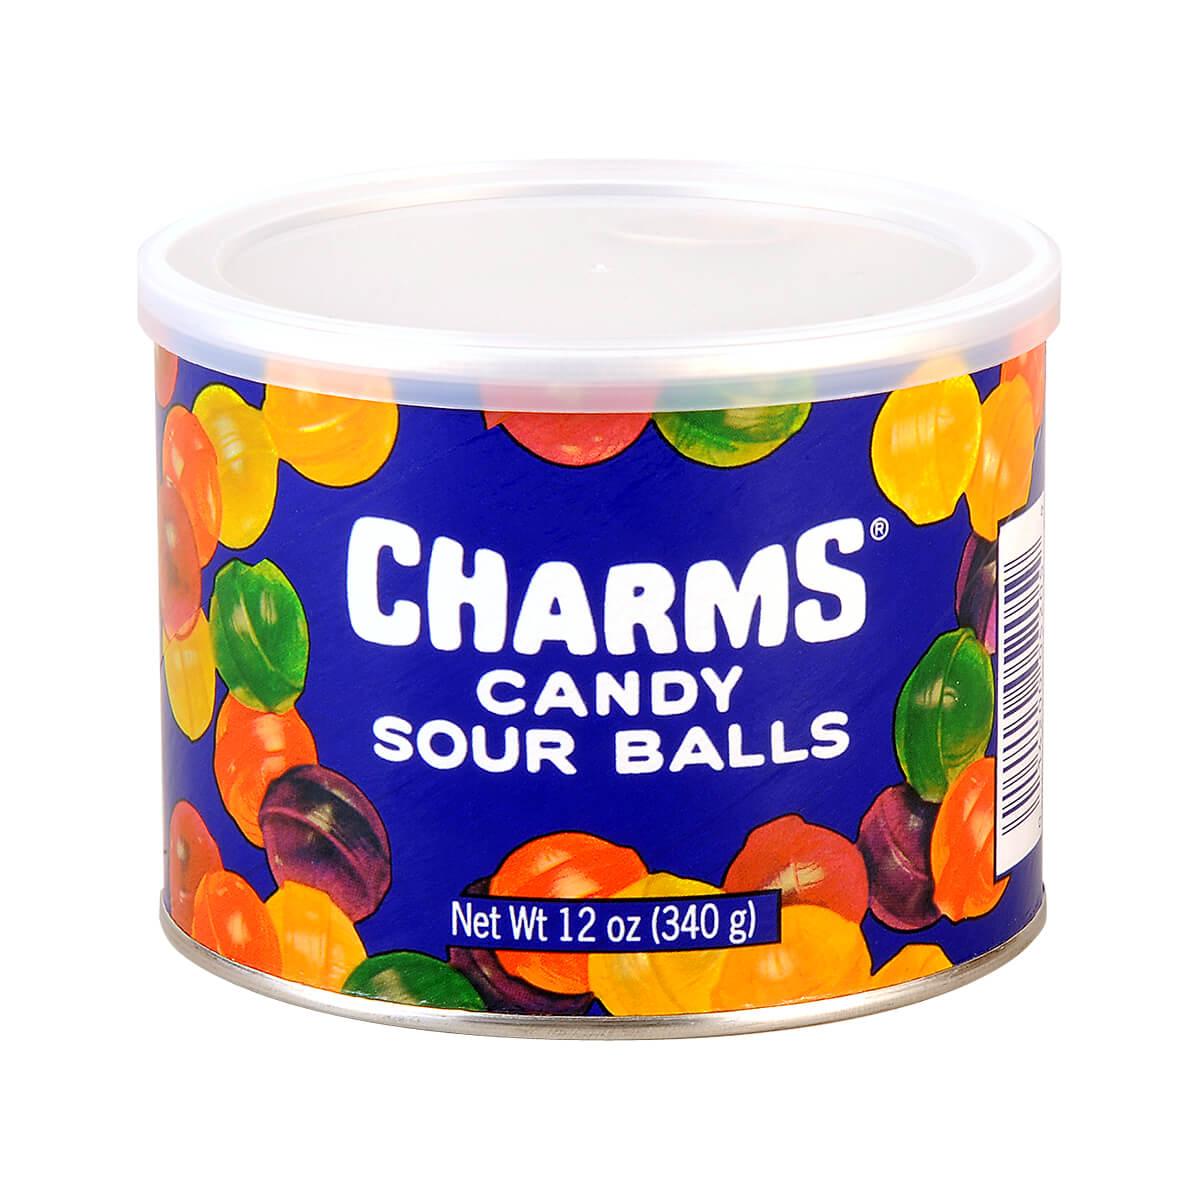  Charms Sour Balls Candy